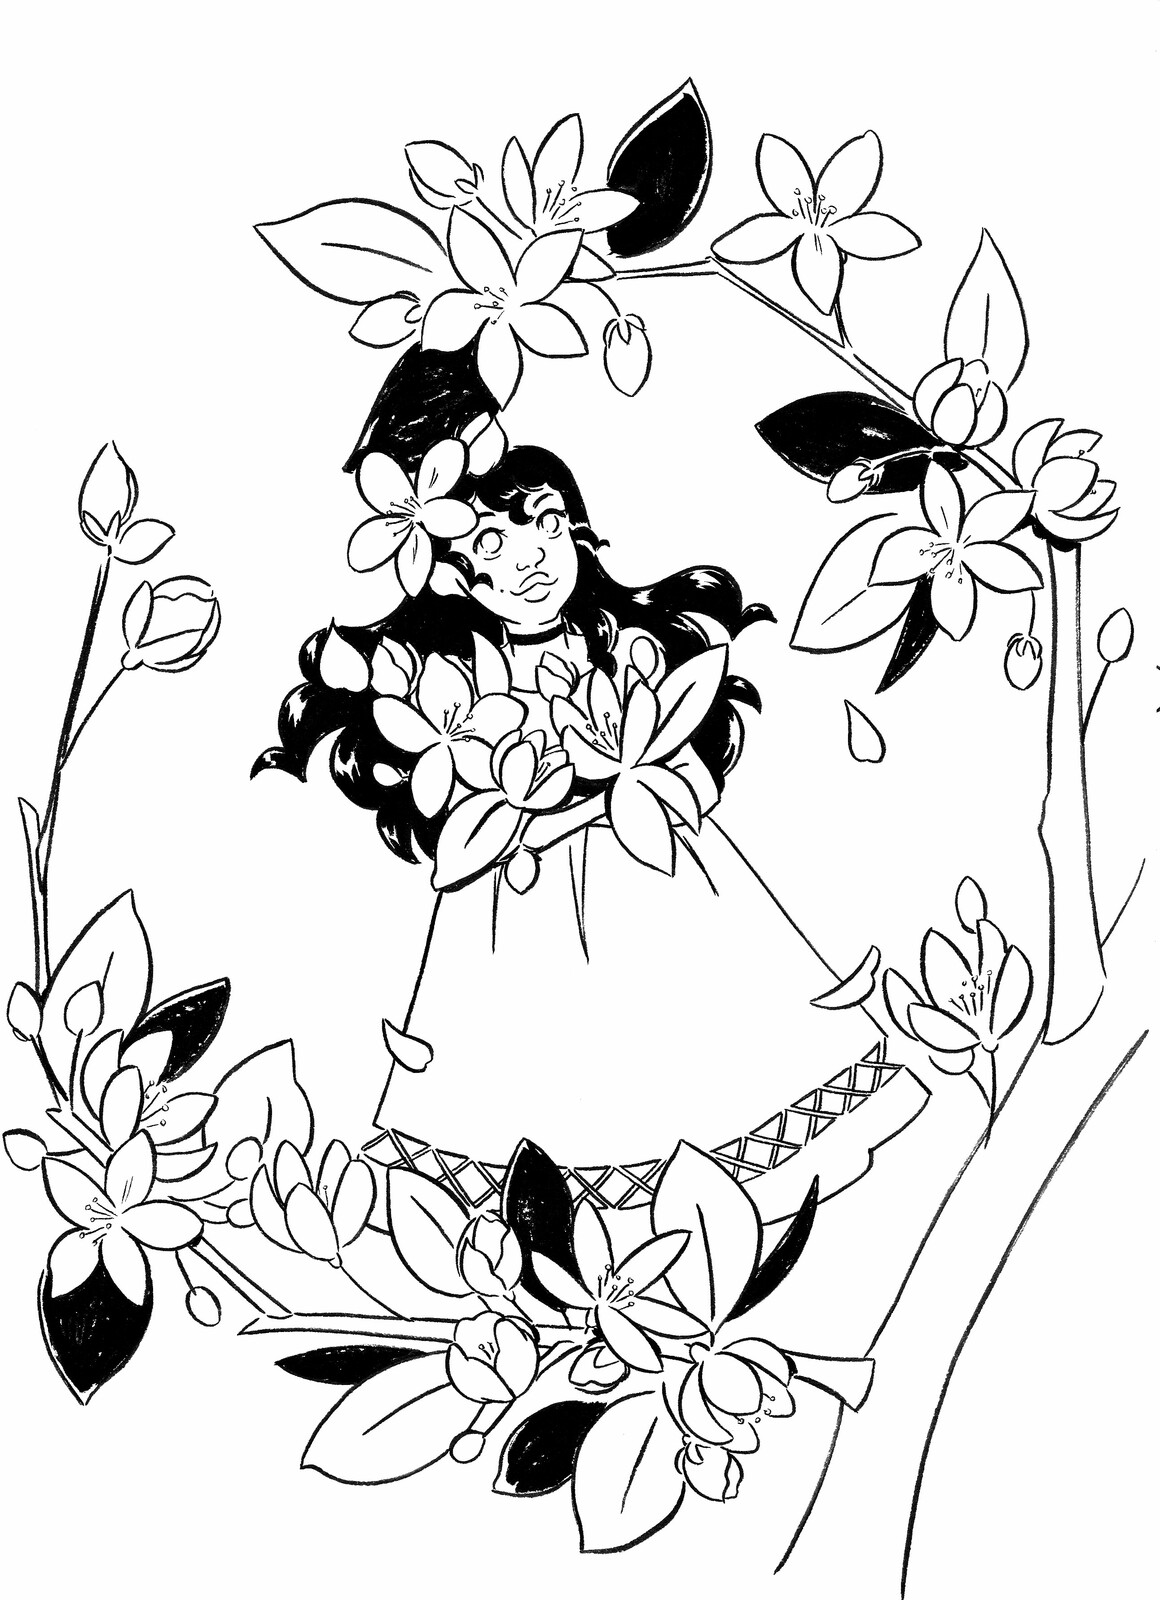 Day 20- Apple Blossoms